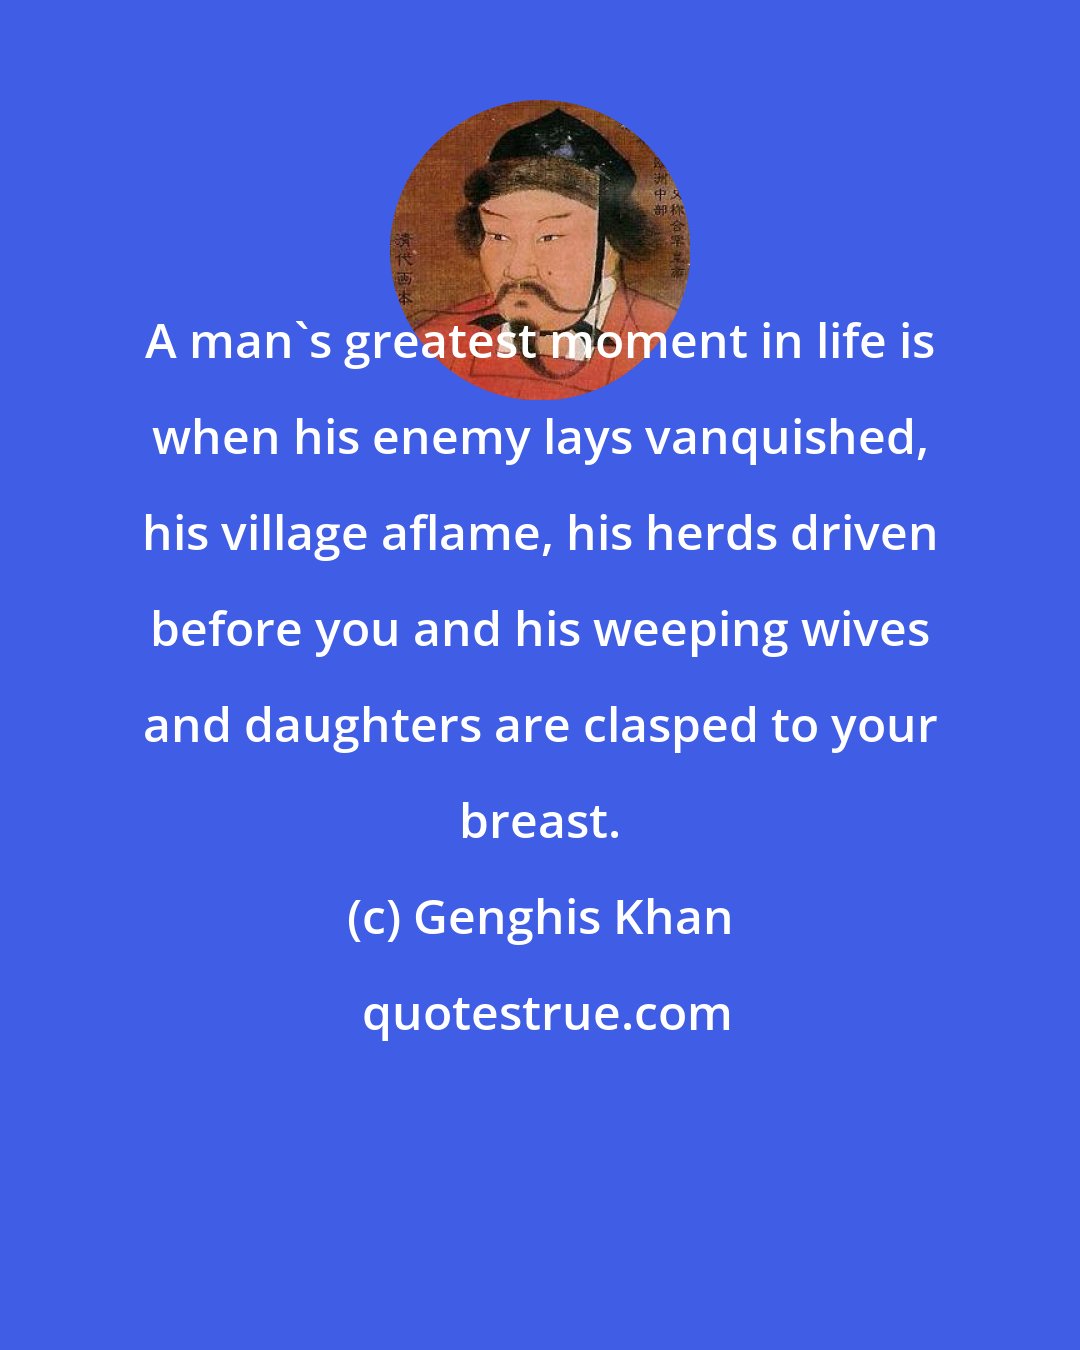 Genghis Khan: A man's greatest moment in life is when his enemy lays vanquished, his village aflame, his herds driven before you and his weeping wives and daughters are clasped to your breast.